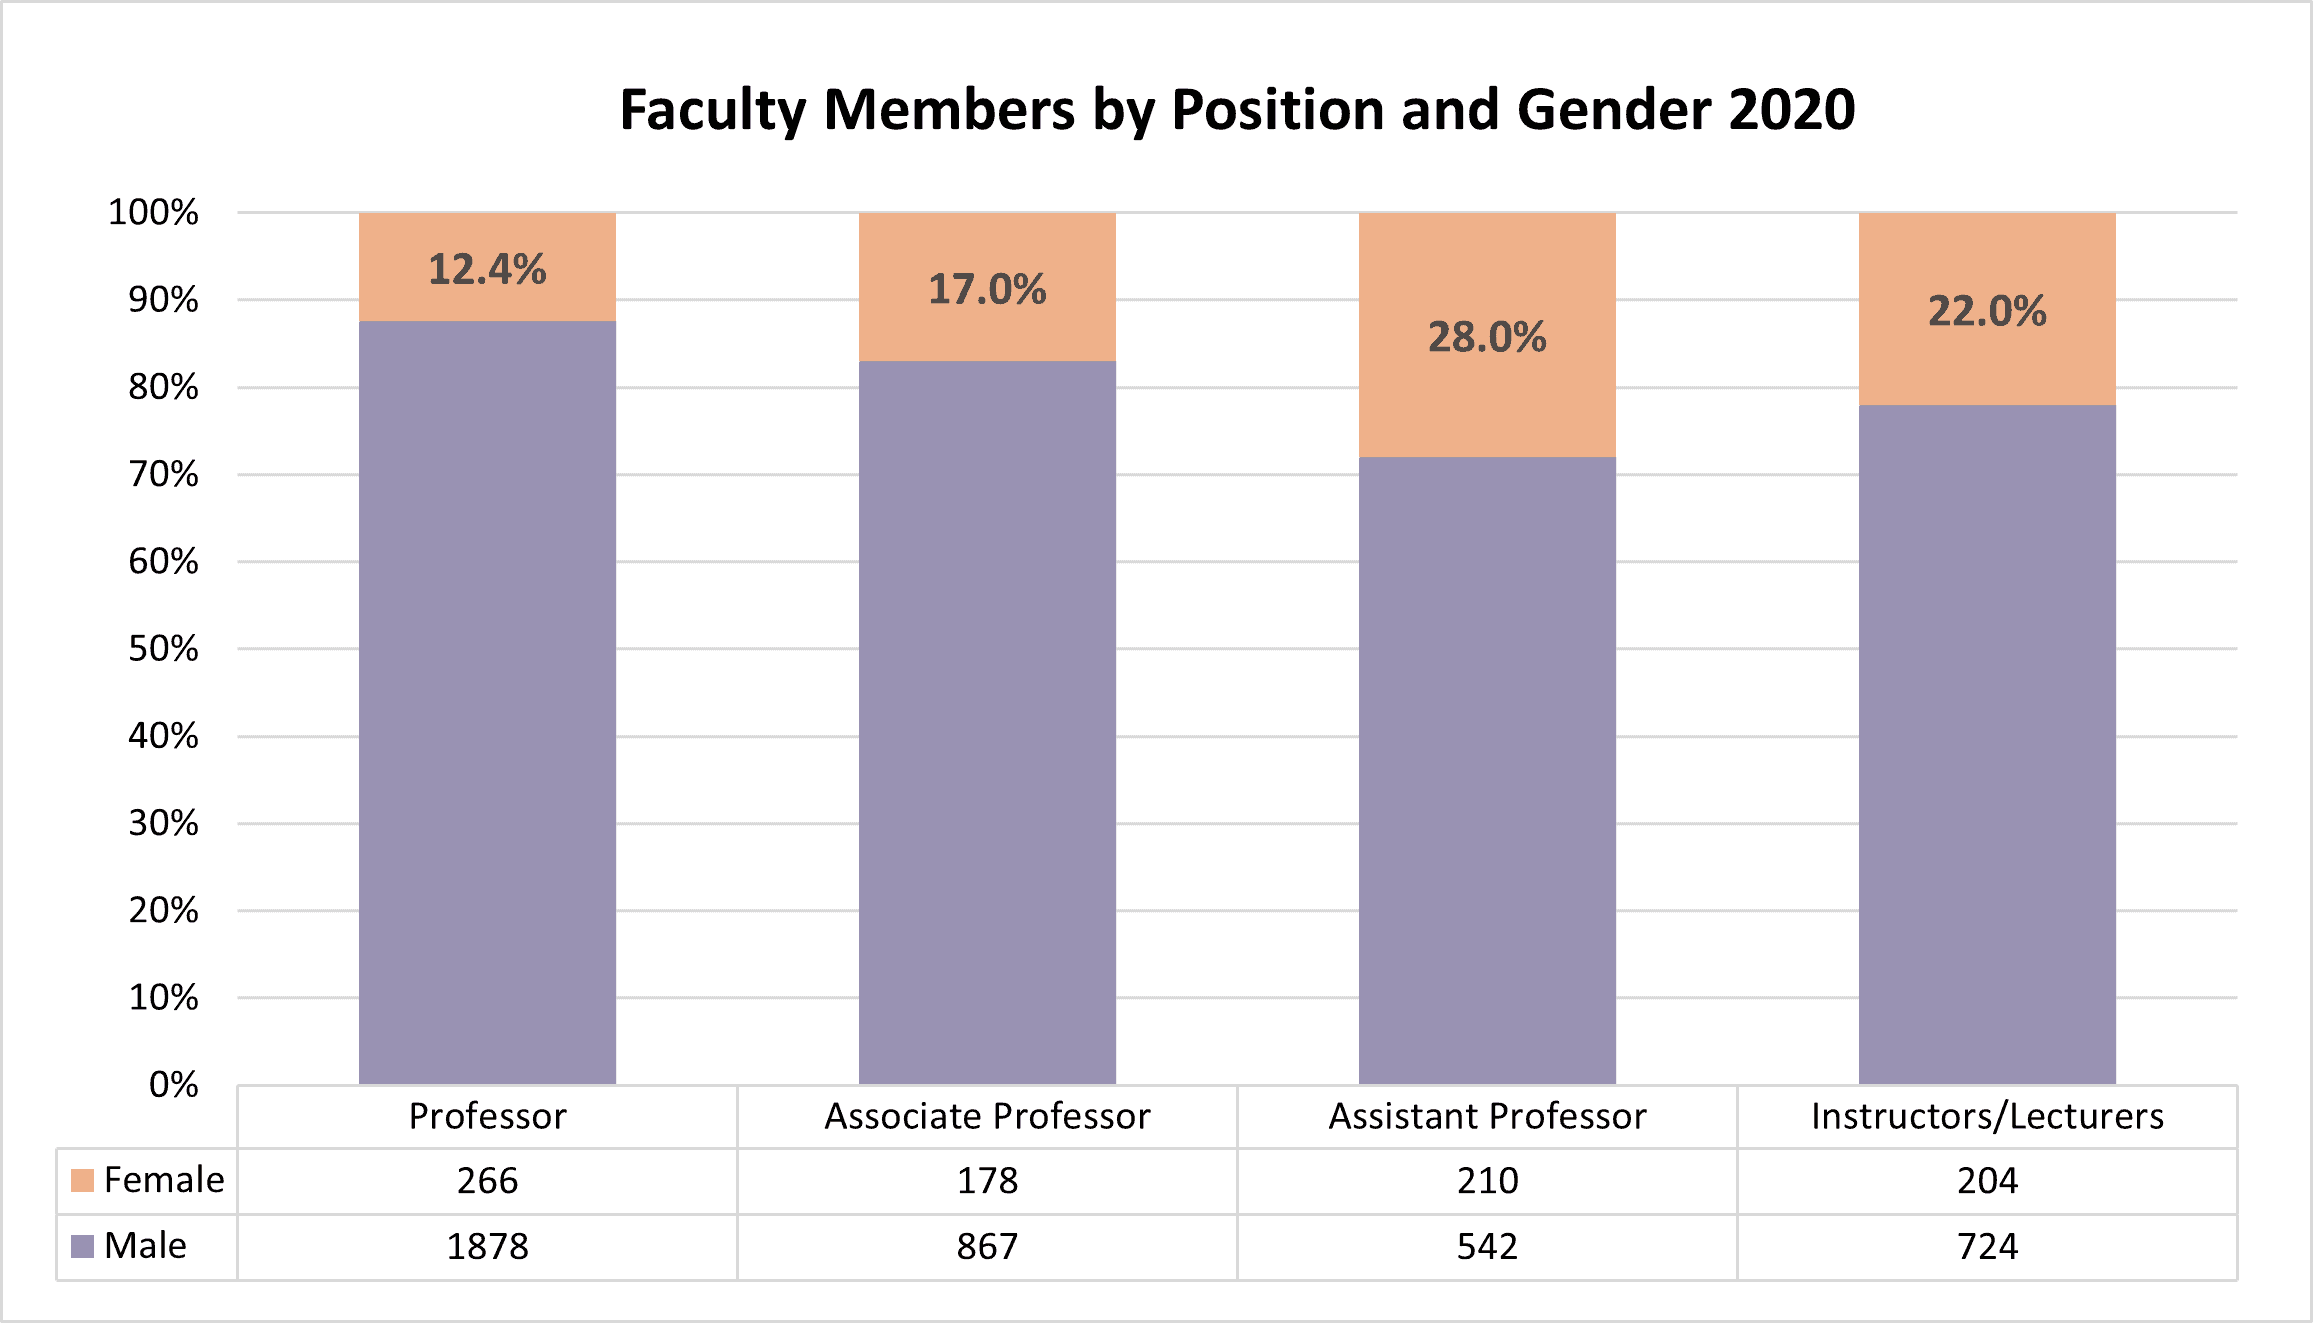 Faculty Gender and Position 2020